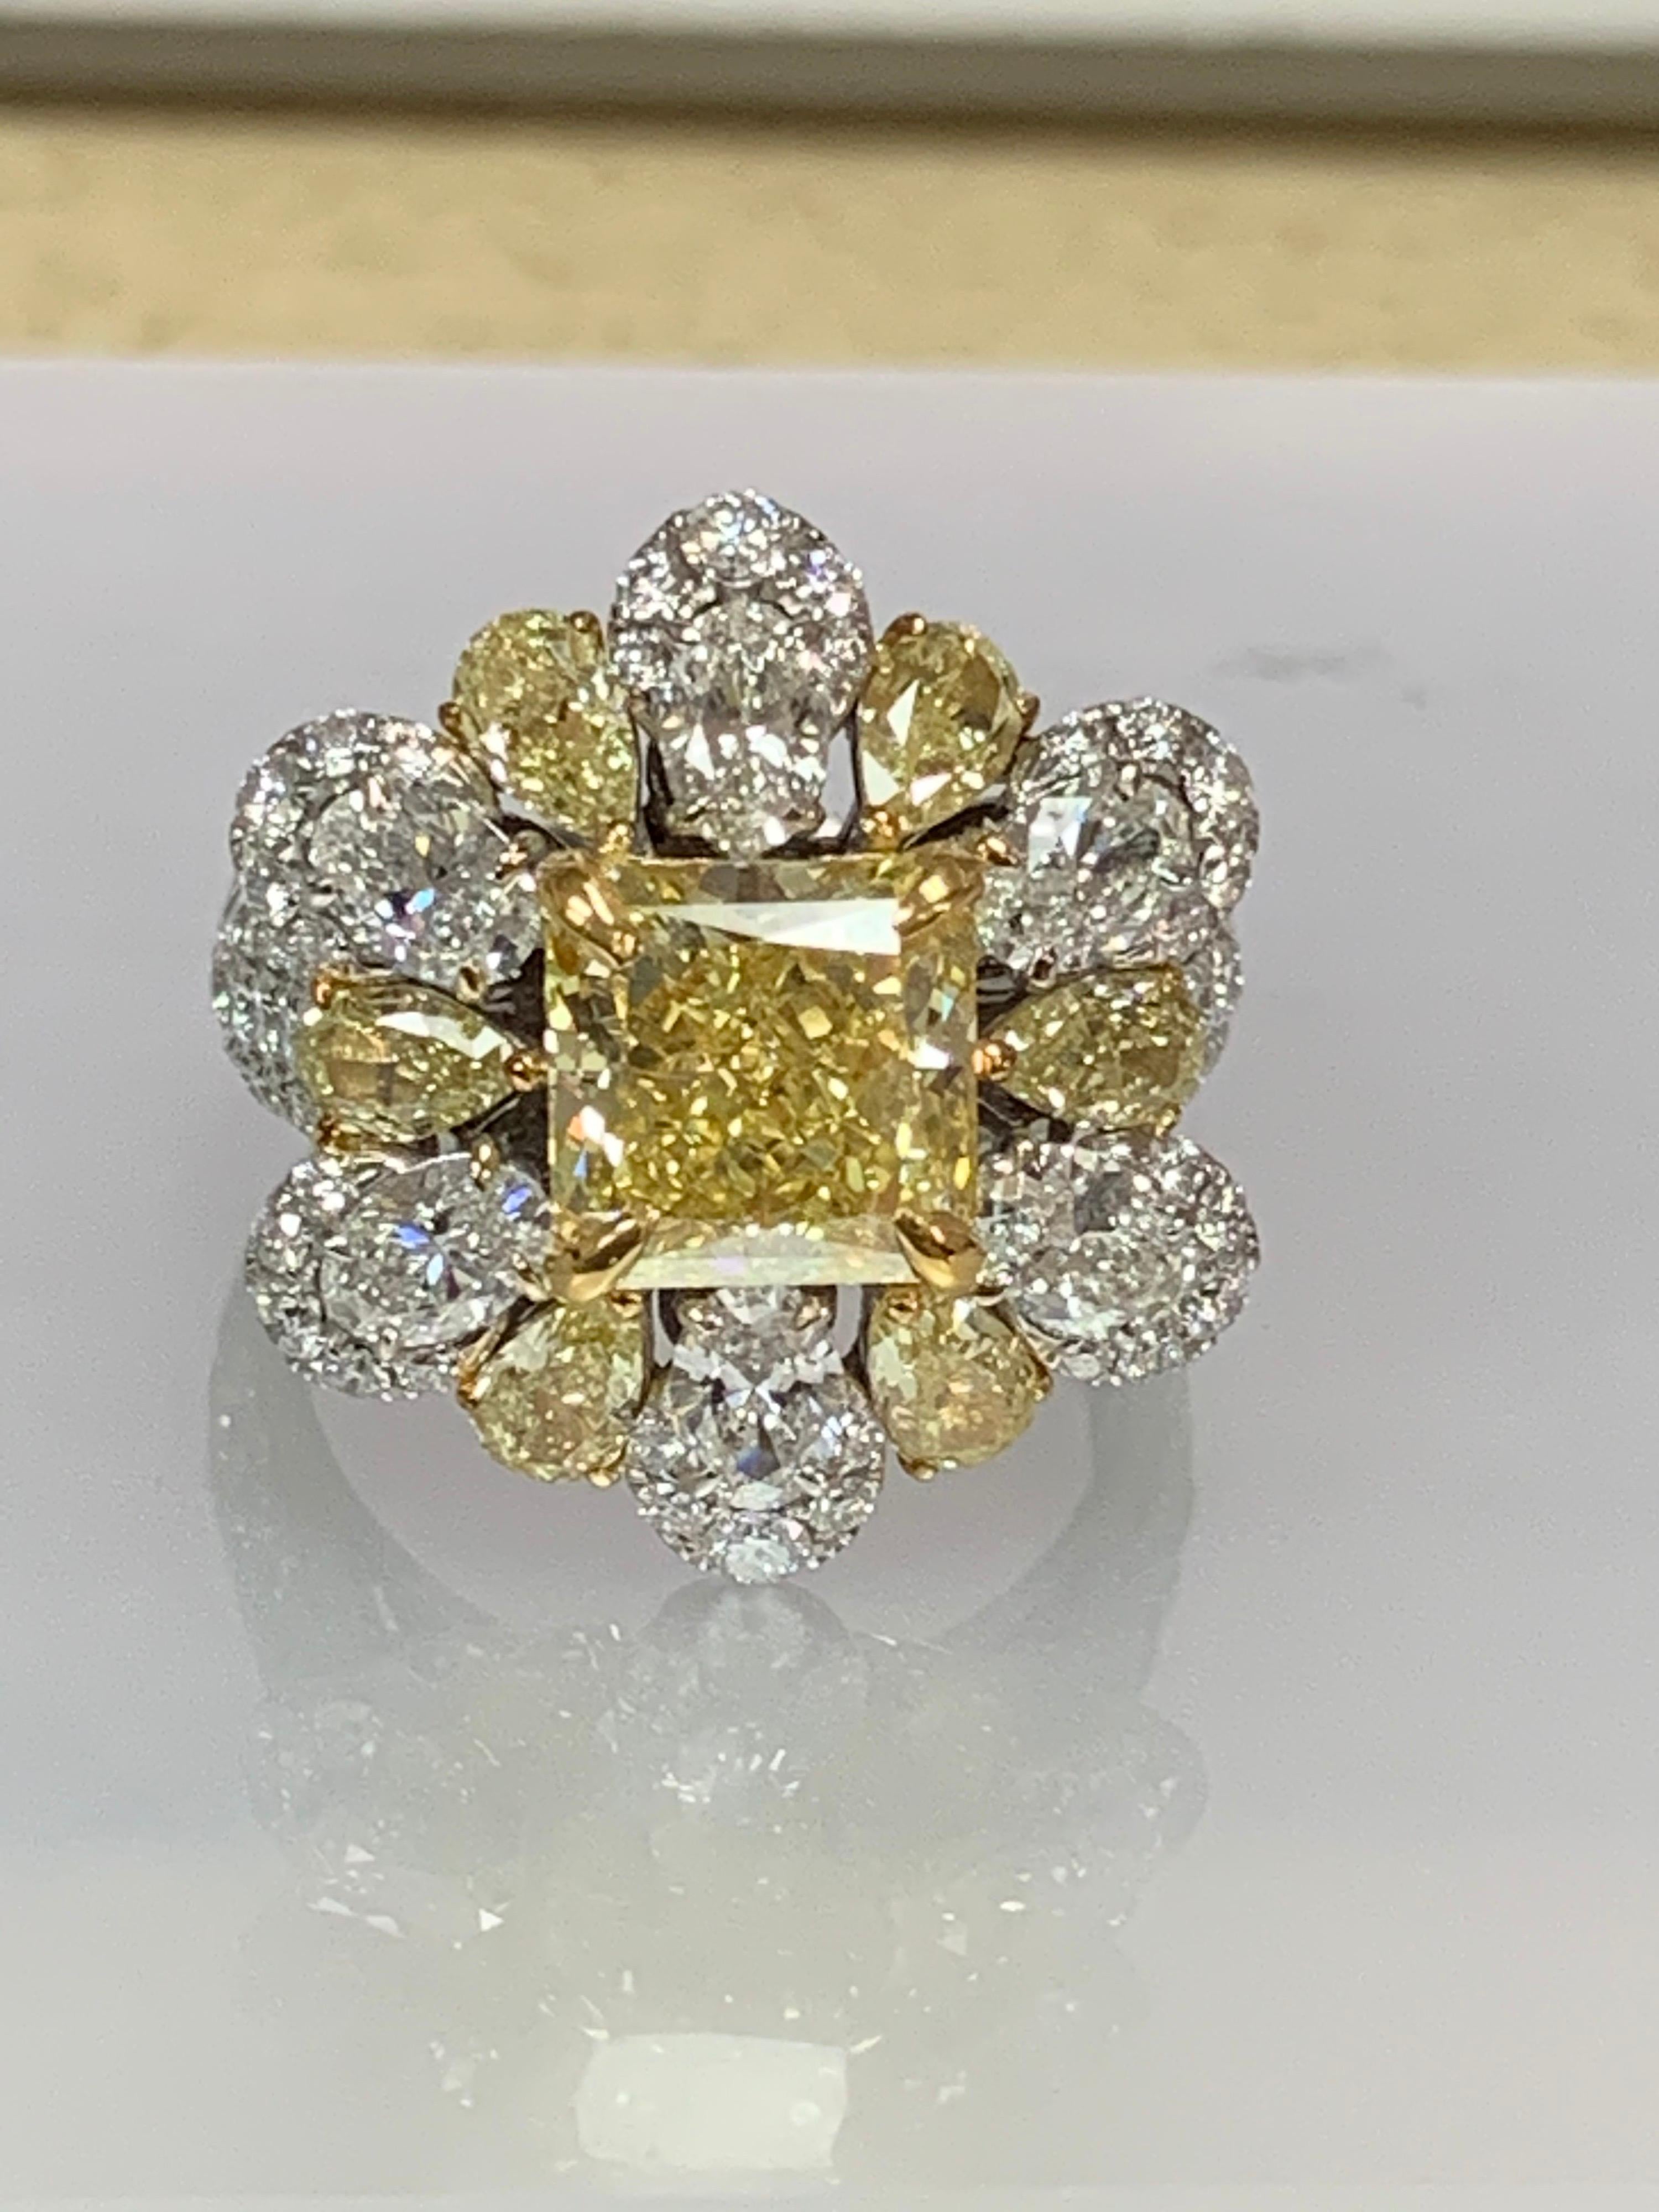 GIA Certified 3.05 center and other diamonds 2.27 Carat white diamonds and 1.27 carat Yellow  on 18 Karat 2 tone gold is one of a kind handcrafted Ring , the ring is well constructed.

The GIA description is as follows 
Clarity grade :IF
Origin: